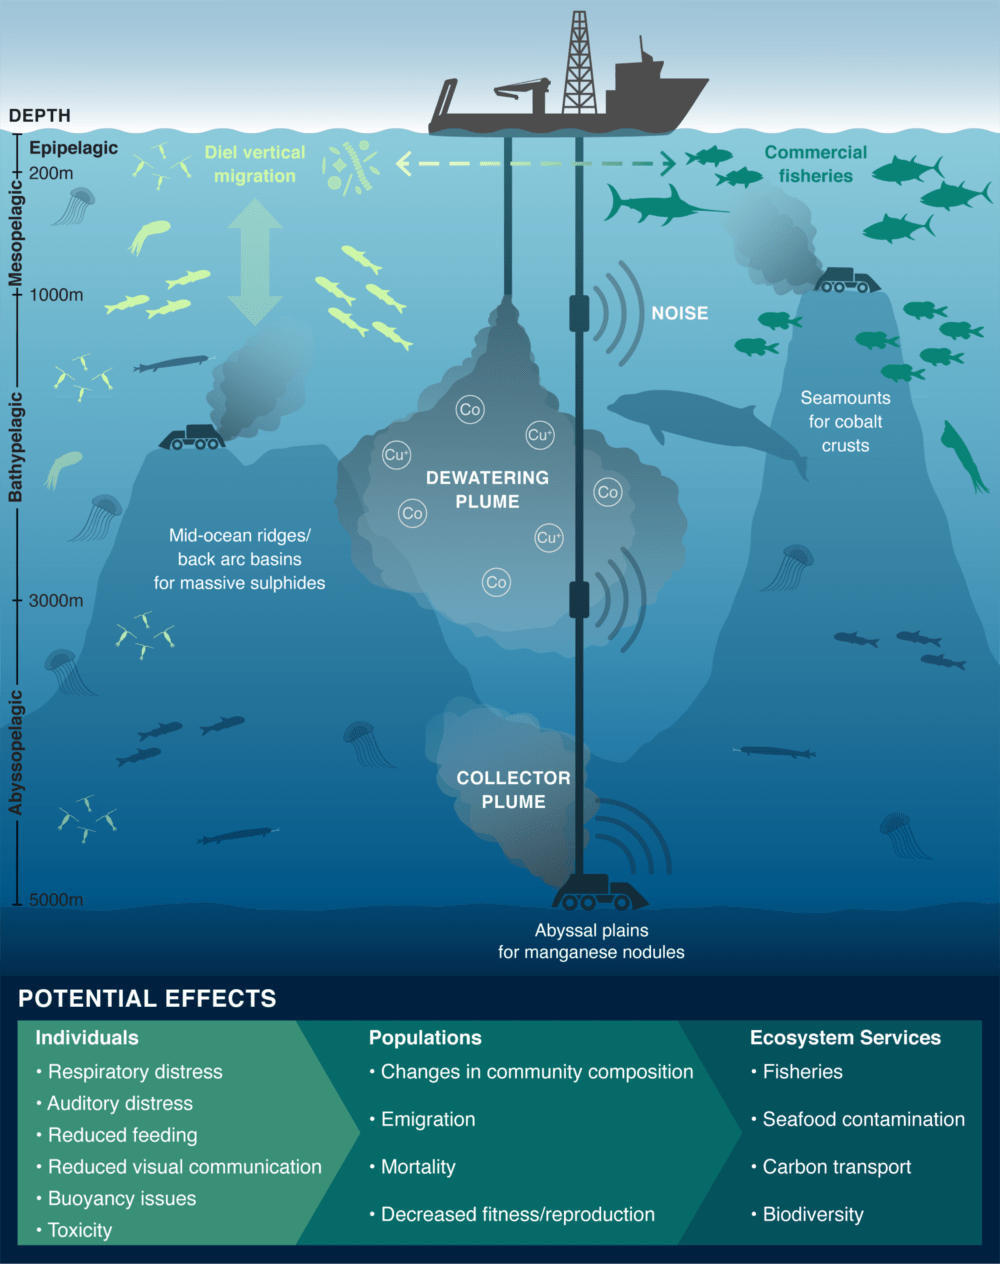 Mining-generated sediment plumes and noise have a variety of possible effects on pelagic taxa. Organisms and plume impacts are not to scale. (Amanda Dillon)